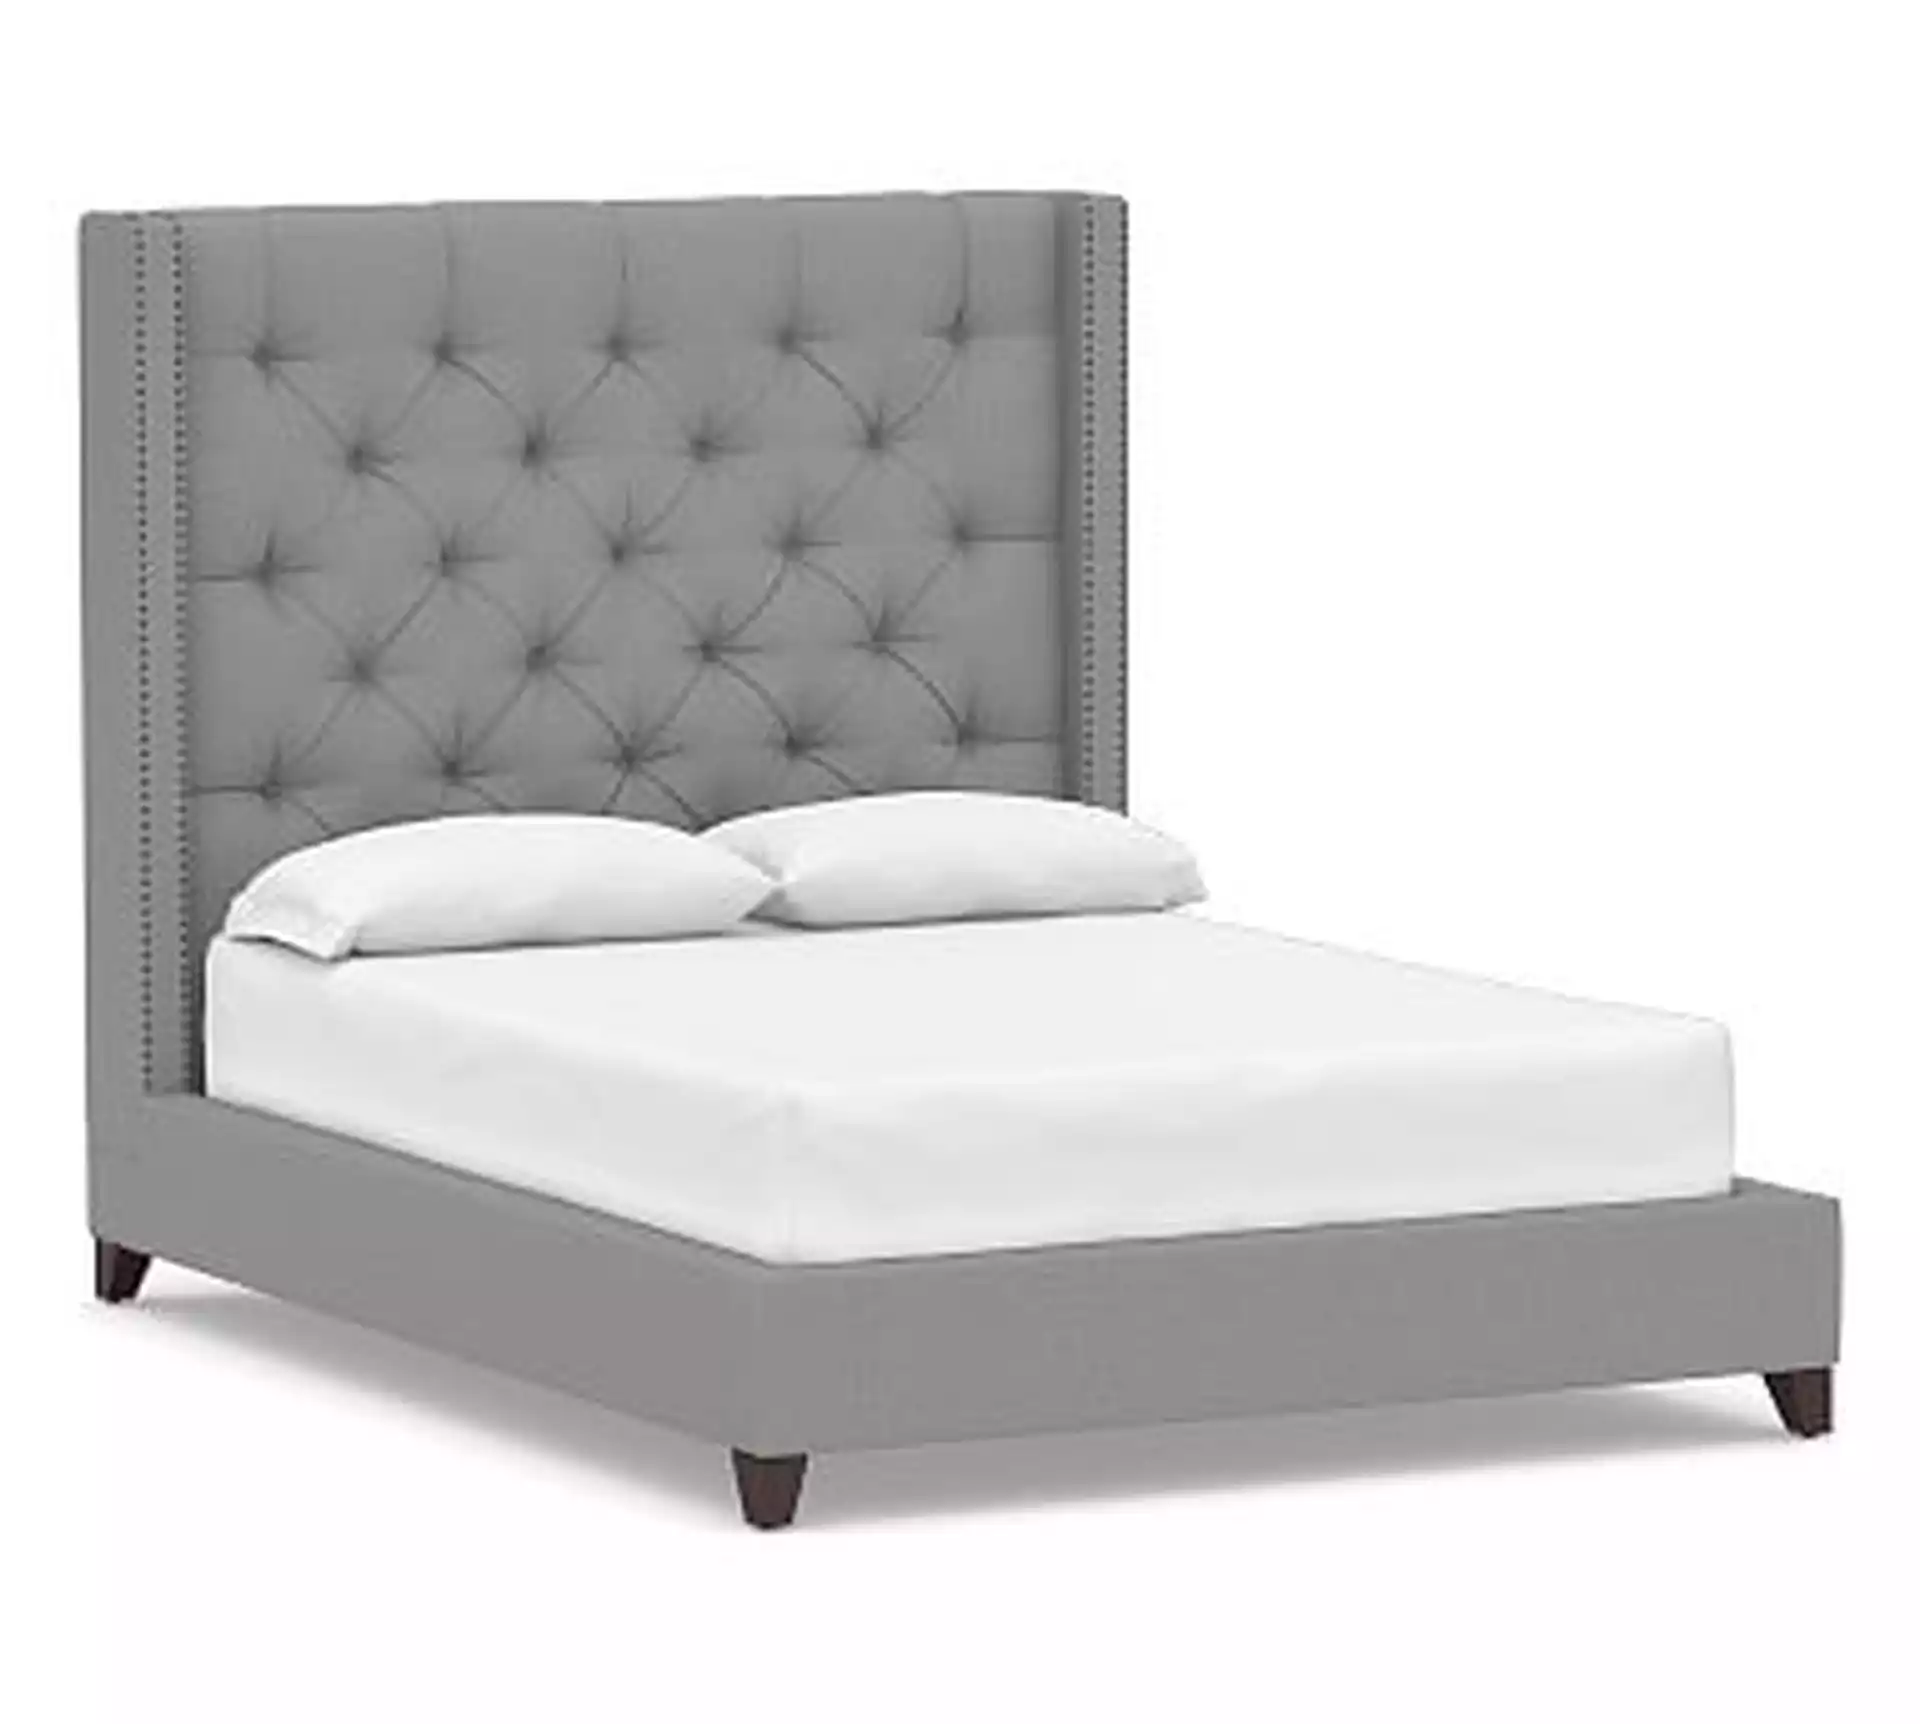 Harper Tufted Upholstered Tall Bed with Bronze Nailheads, Queen, Performance Brushed Basketweave Chambray